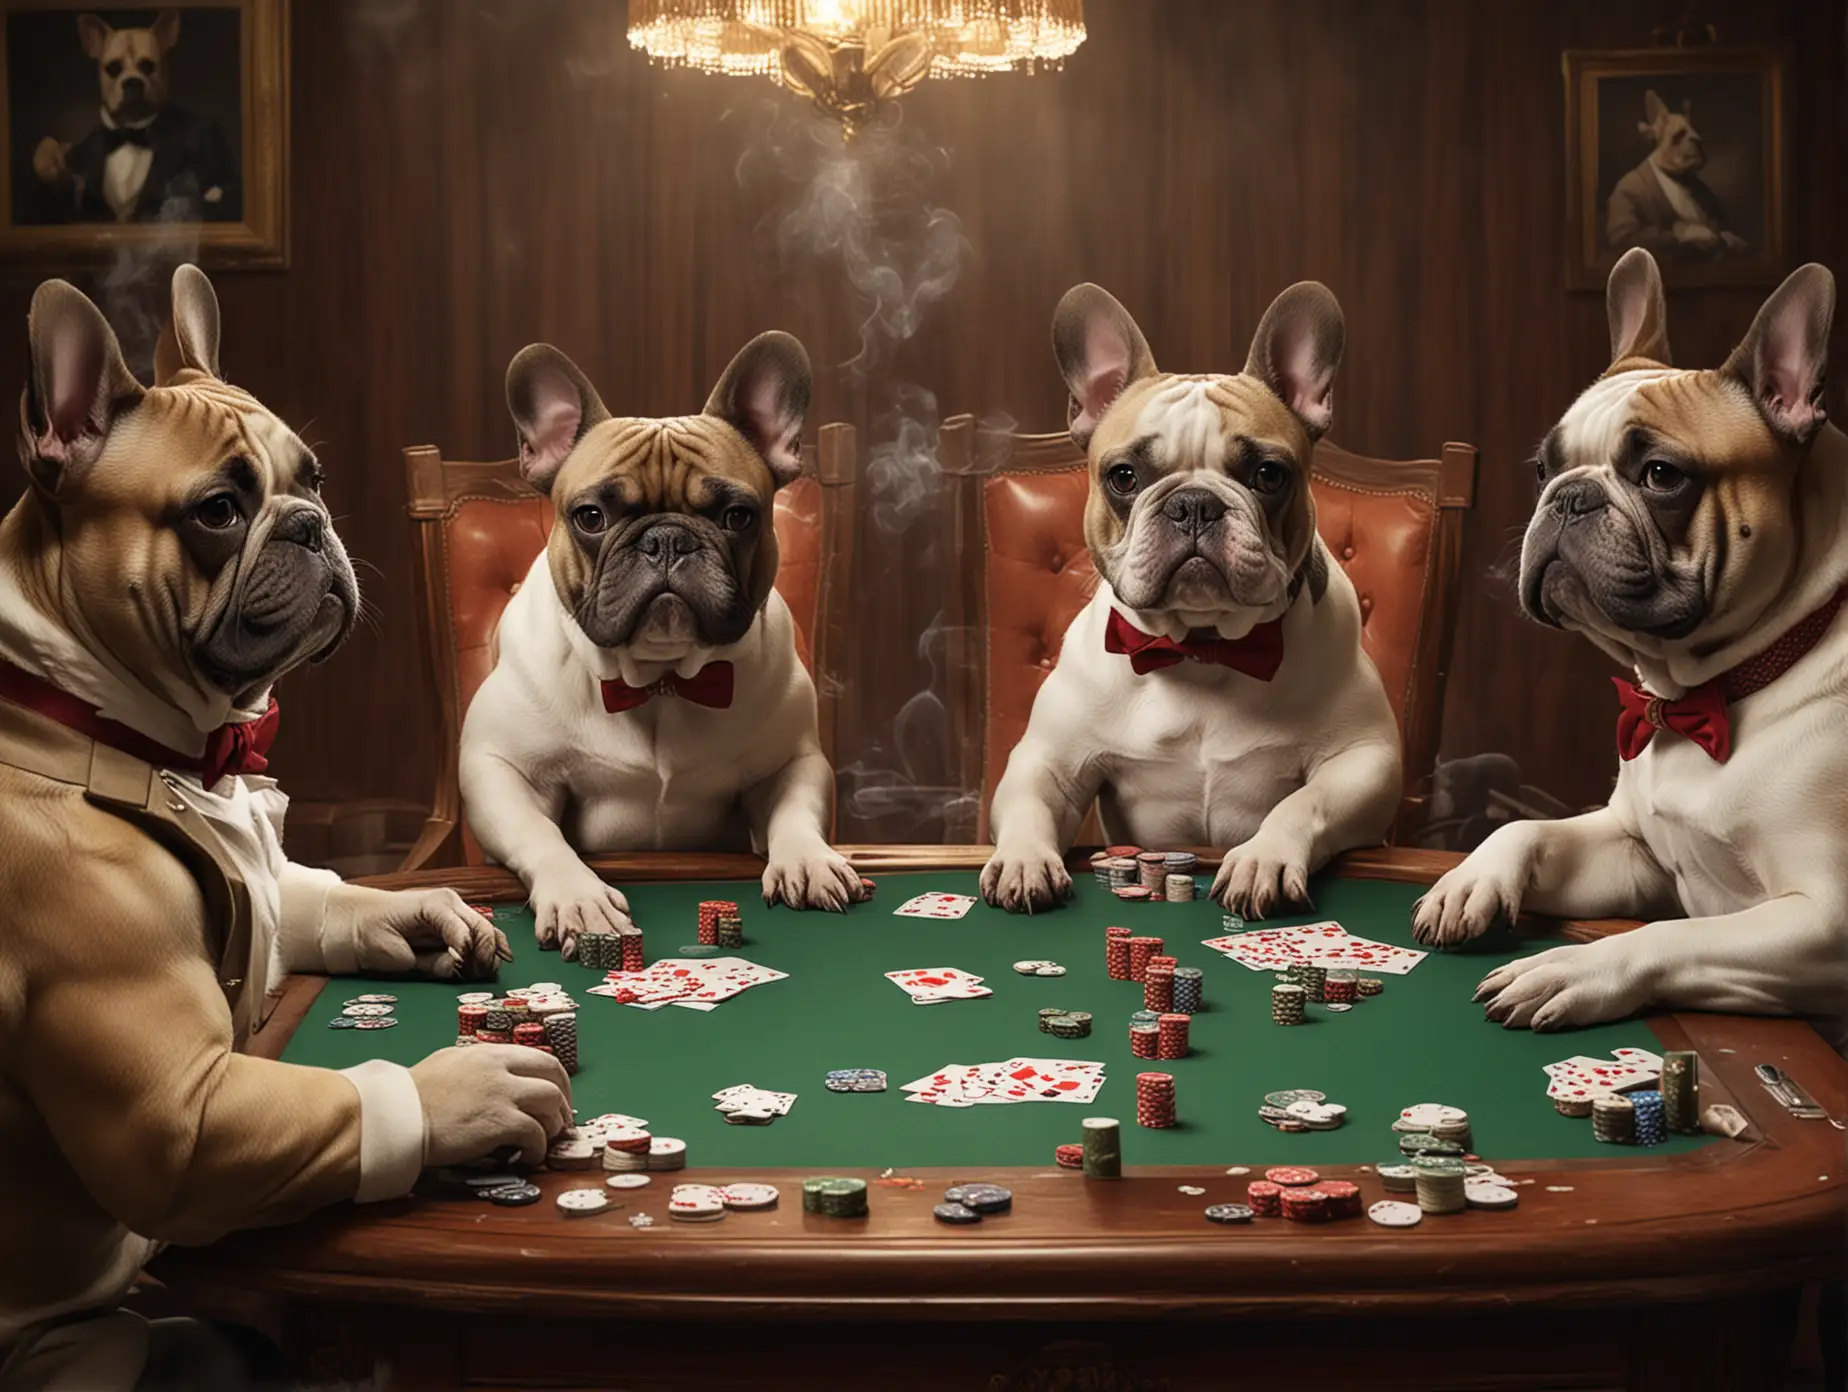 French bulldogs playing poker, smoking cigars, looking all gangsta around the table